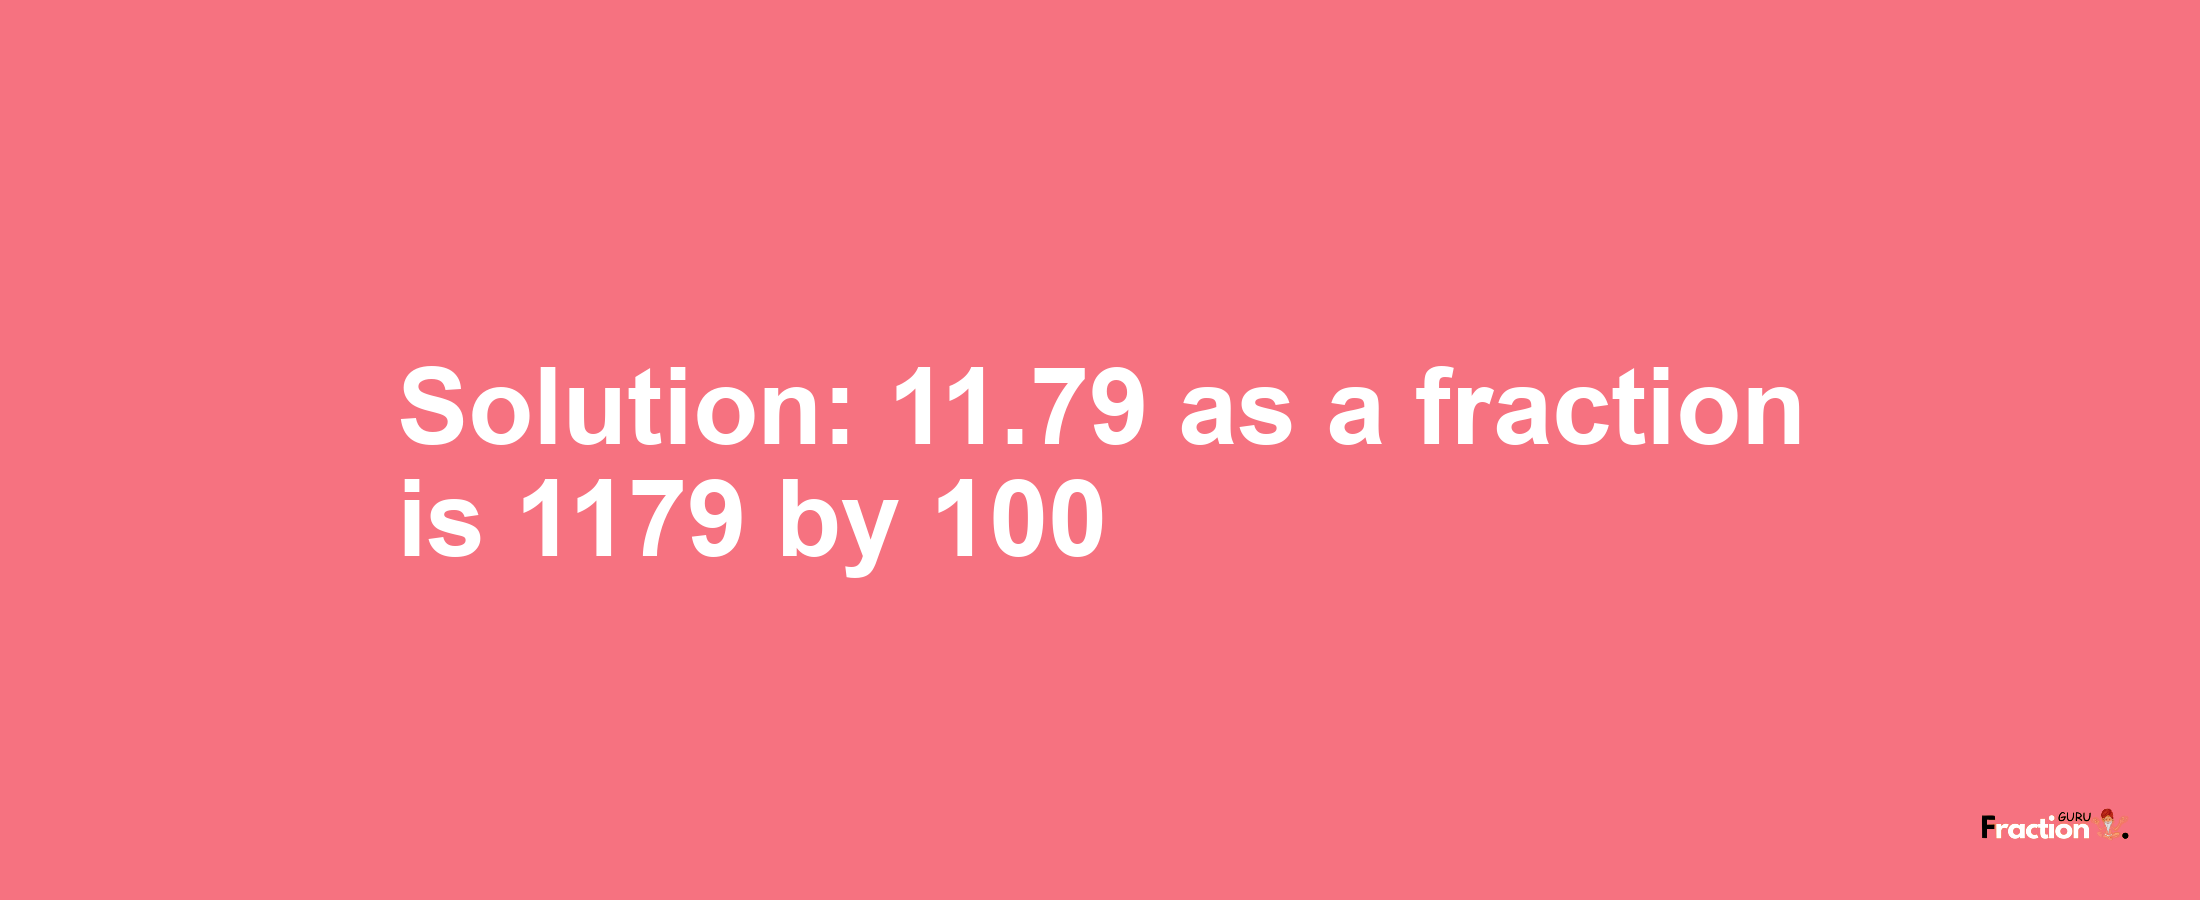 Solution:11.79 as a fraction is 1179/100